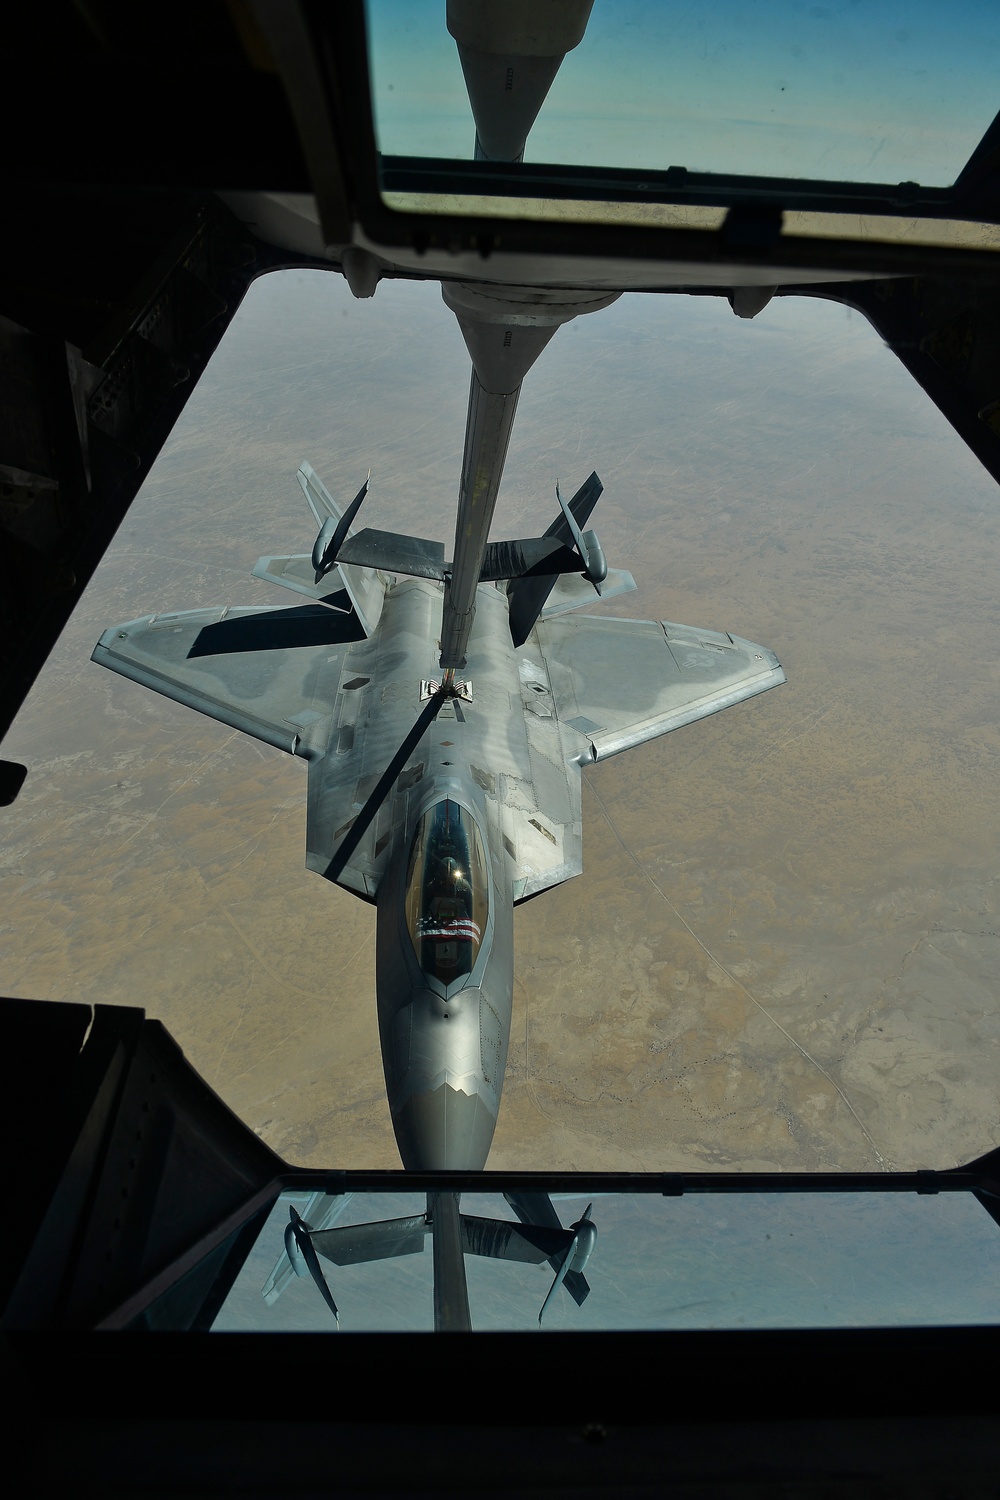 380th supports Operation Inherent Resolve with mobile gas